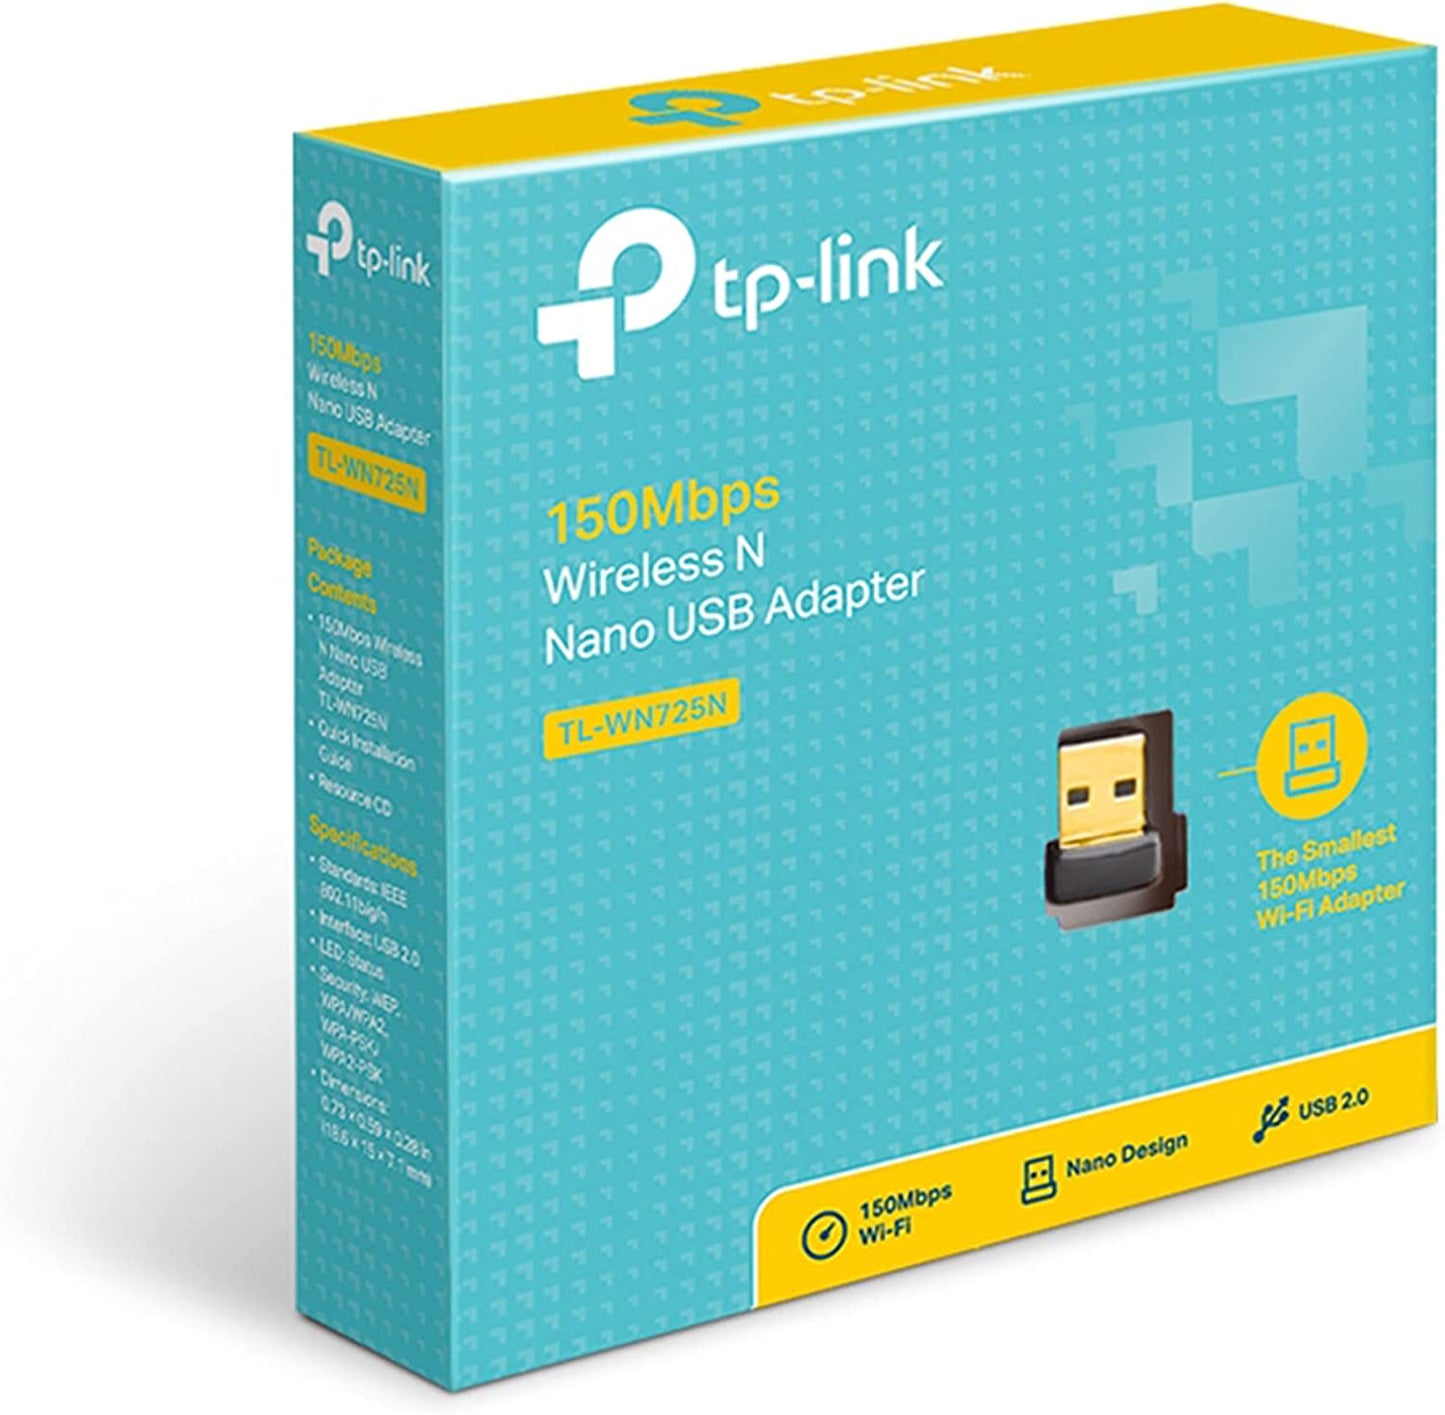 TP-Link USB WiFi Adapter for PC(TL-WN725N), N150 Wireless Network Adapter for Desktop - Nano Size WiFi Dongle for Windows 11/10/7/8/8.1/XP/ Mac OS 10.9-10.15 Linux Kernel 2.6.18-4.4.3, 2.4GHz Only